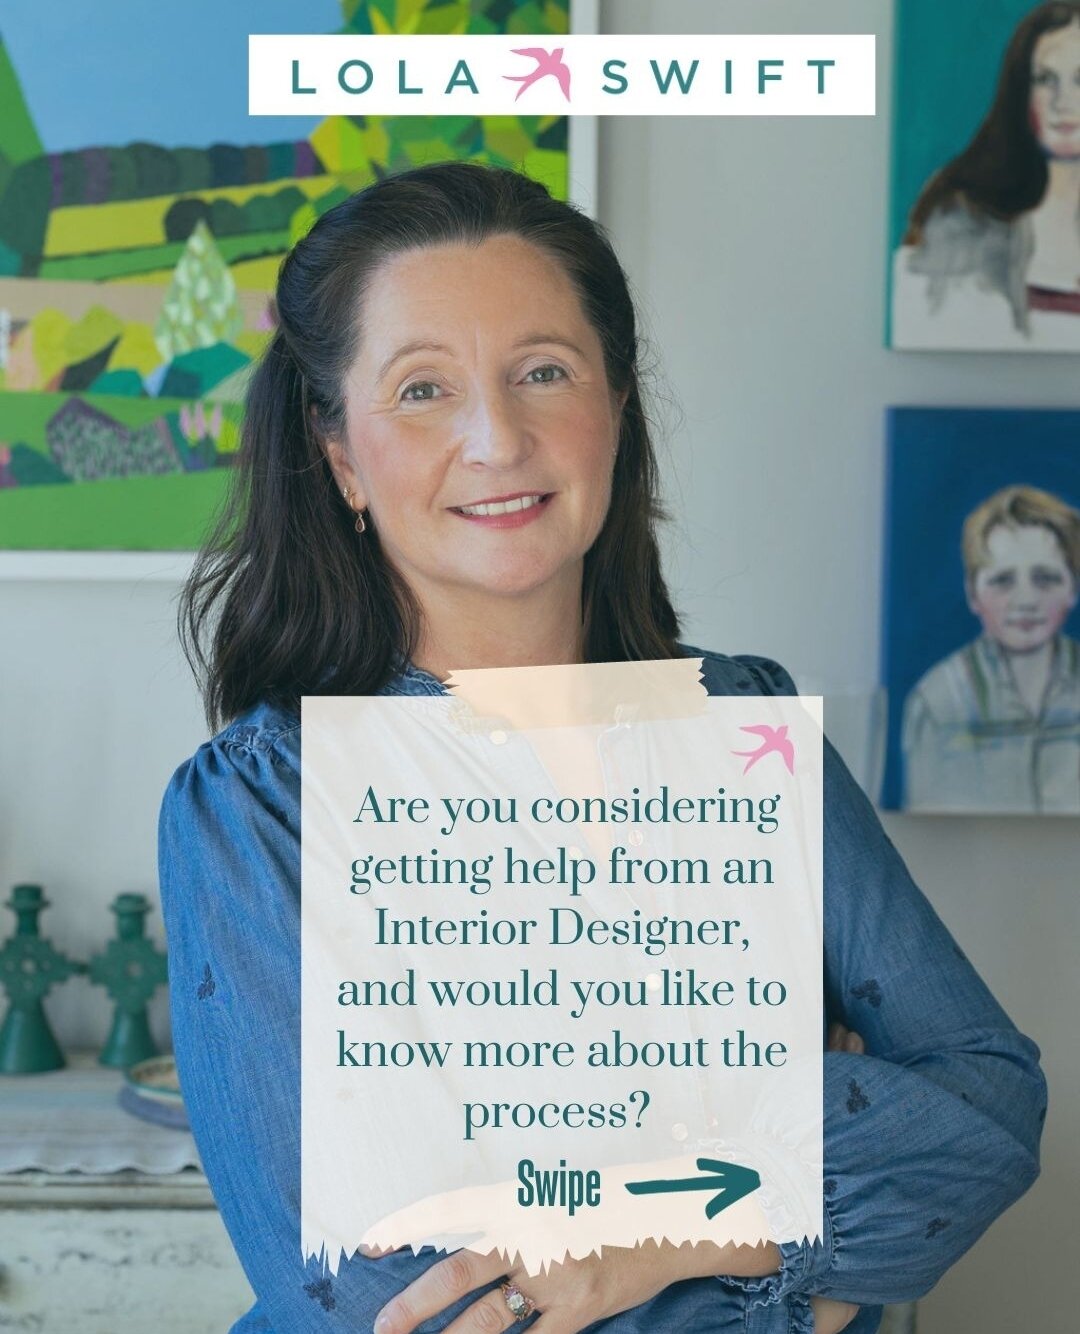 Are you in the process of planning a renovation project or considering updating a room in your home? ⁠
⁠
Interested in experiencing the assistance of an interior designer? Swipe to see how I collaborate with my clients. ➡️⁠
⁠
Using my design skills w